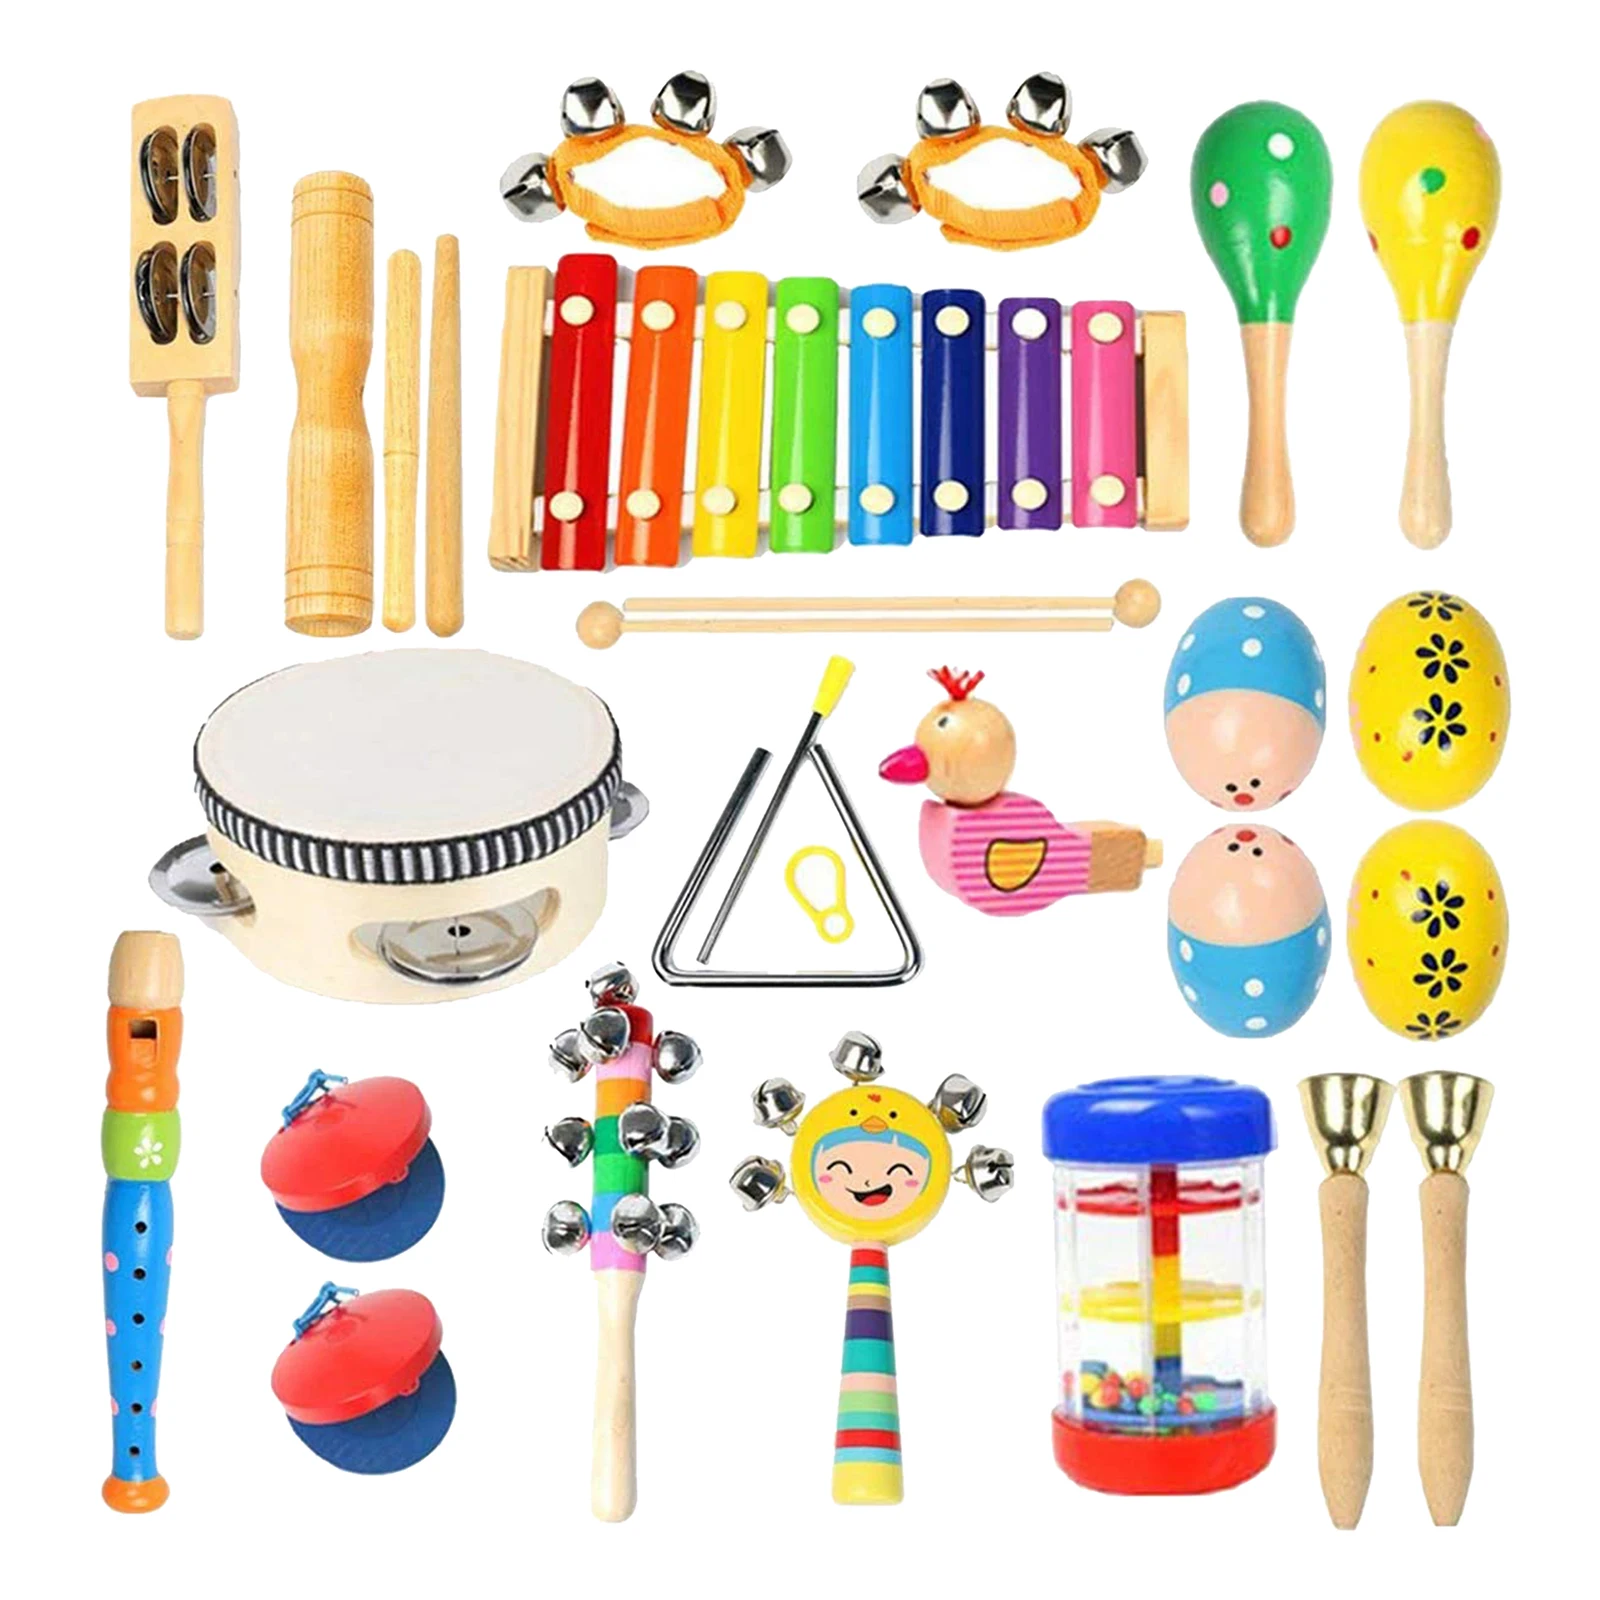 Buself Toddler Musical Instruments 15 Types 25pcs Wooden Percussion Instruments 